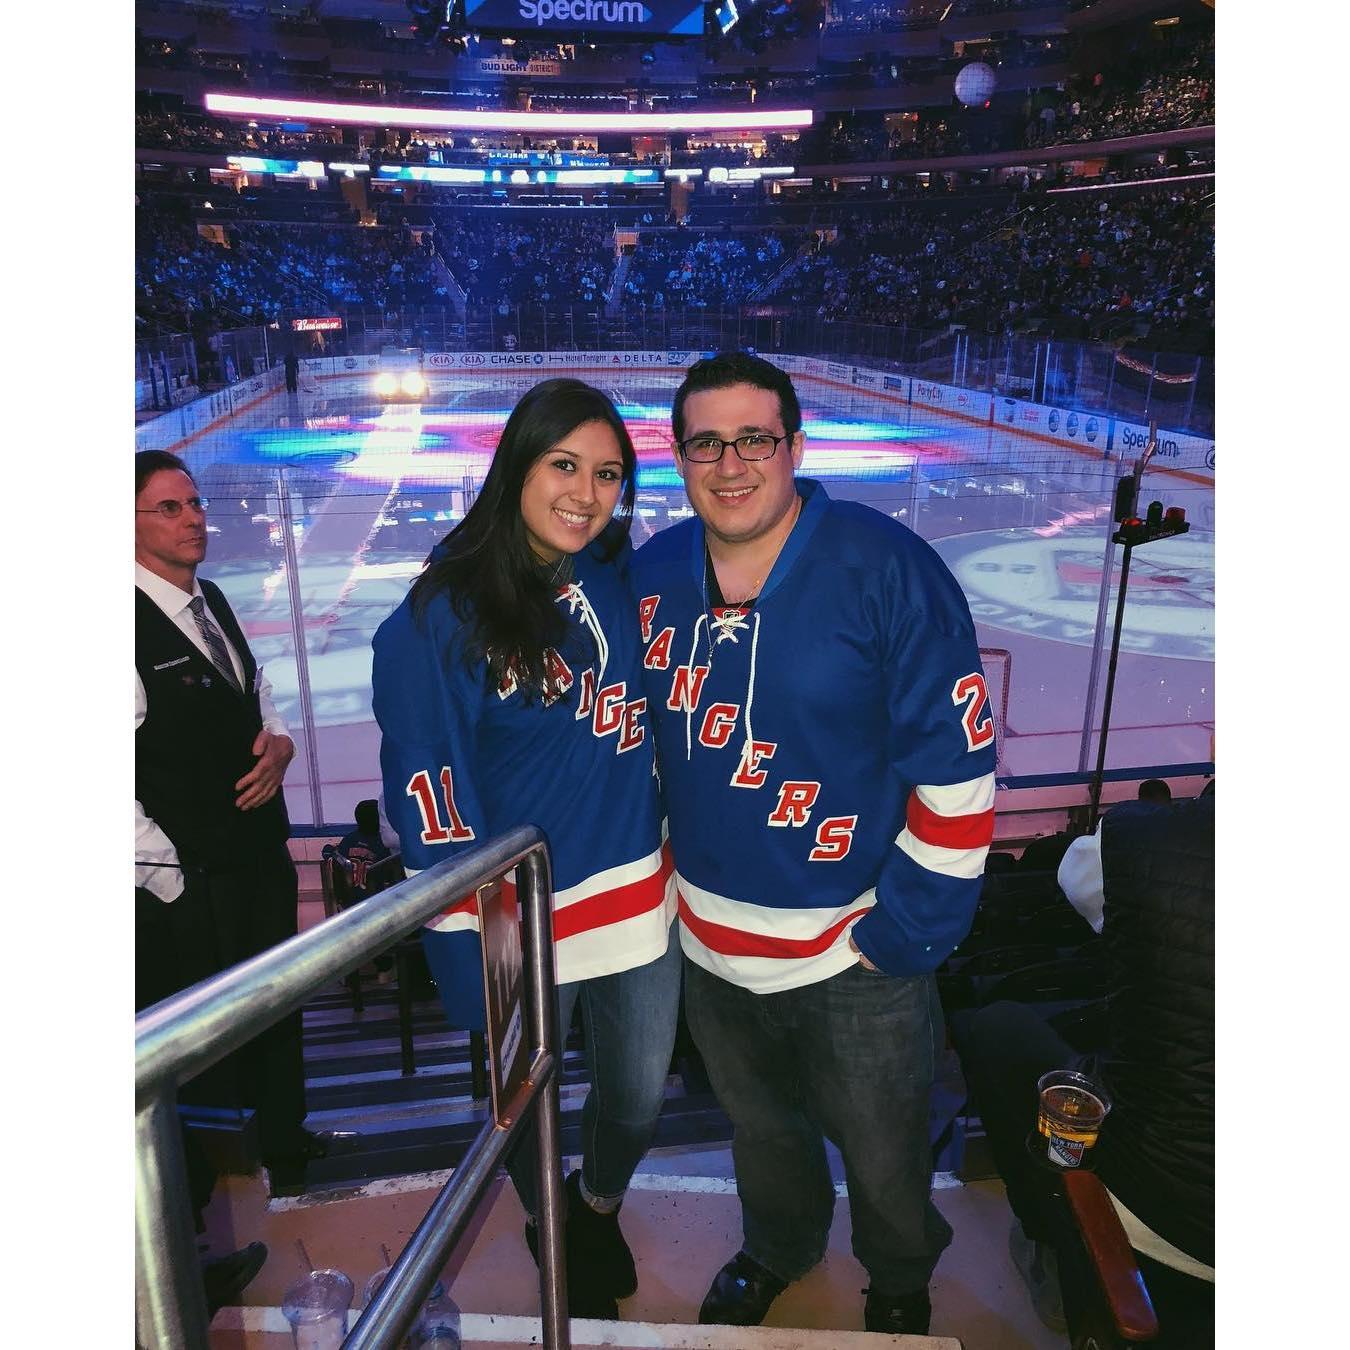 Our first Rangers game together!